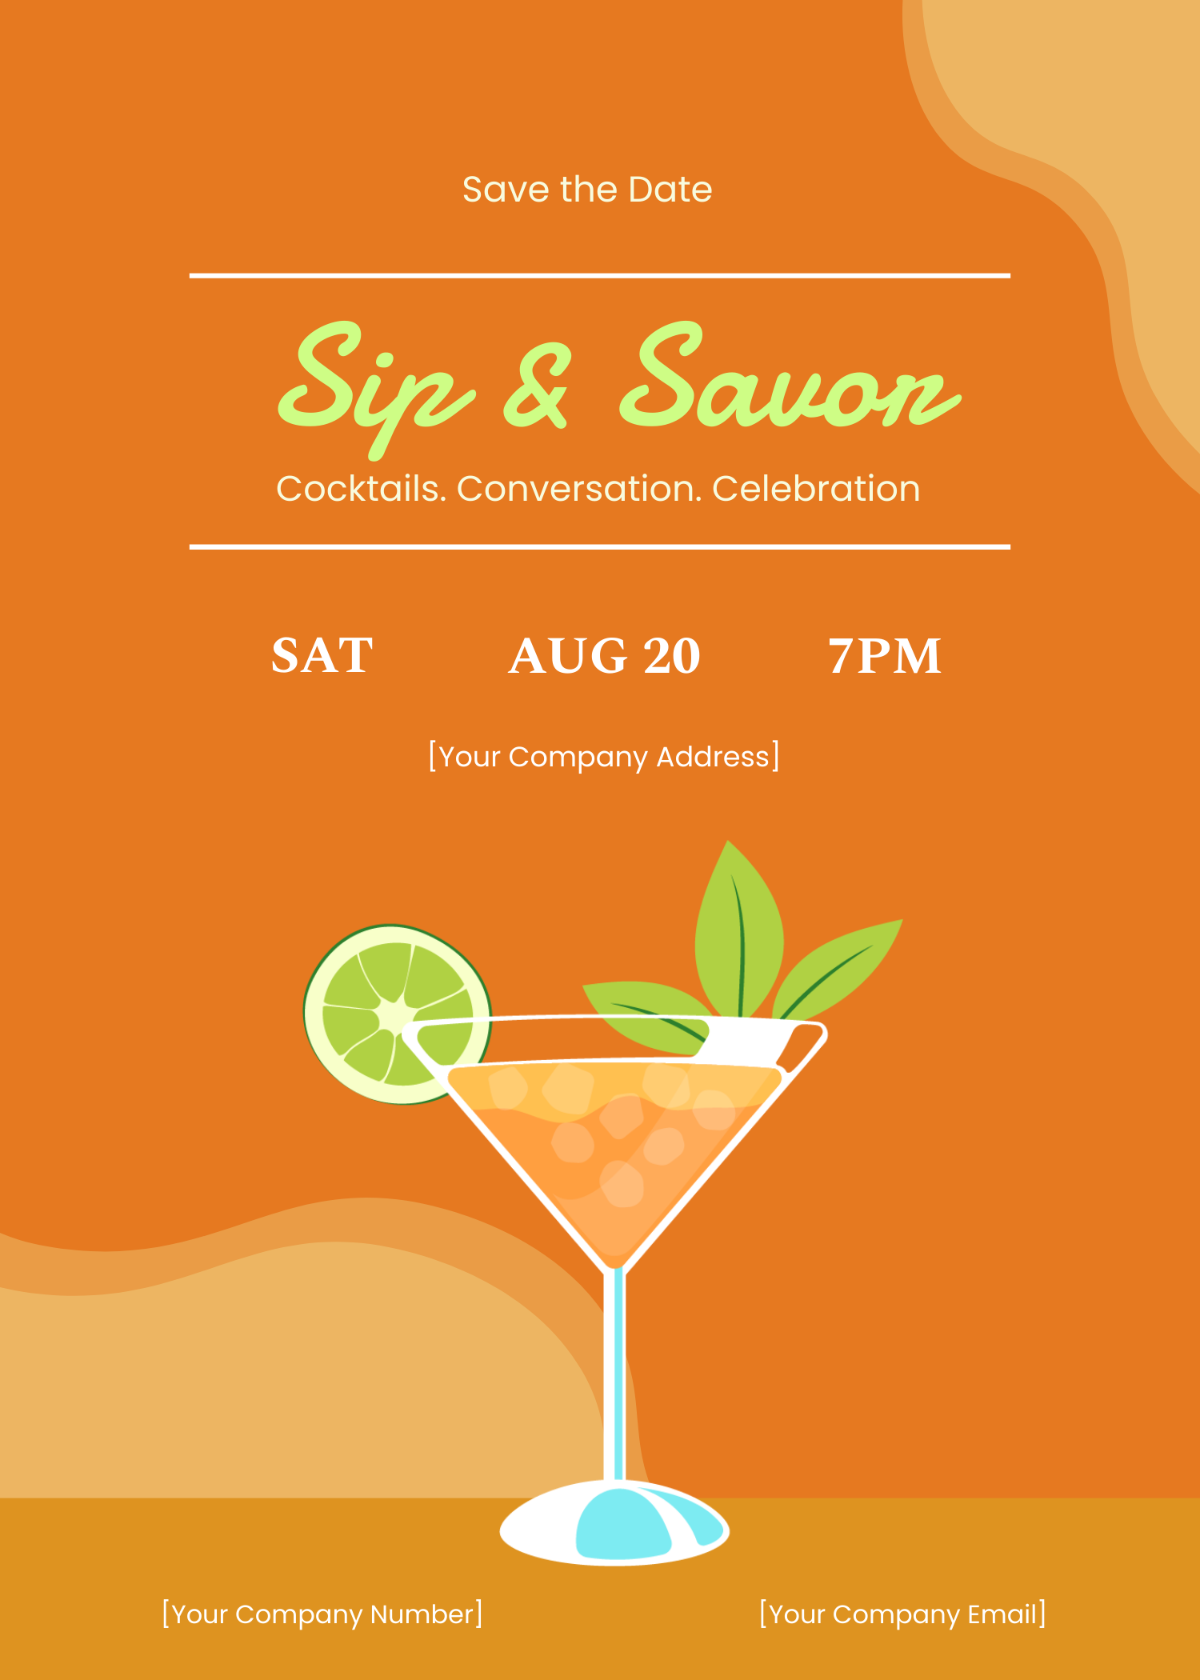 Save the Date Cocktail Party Invitation